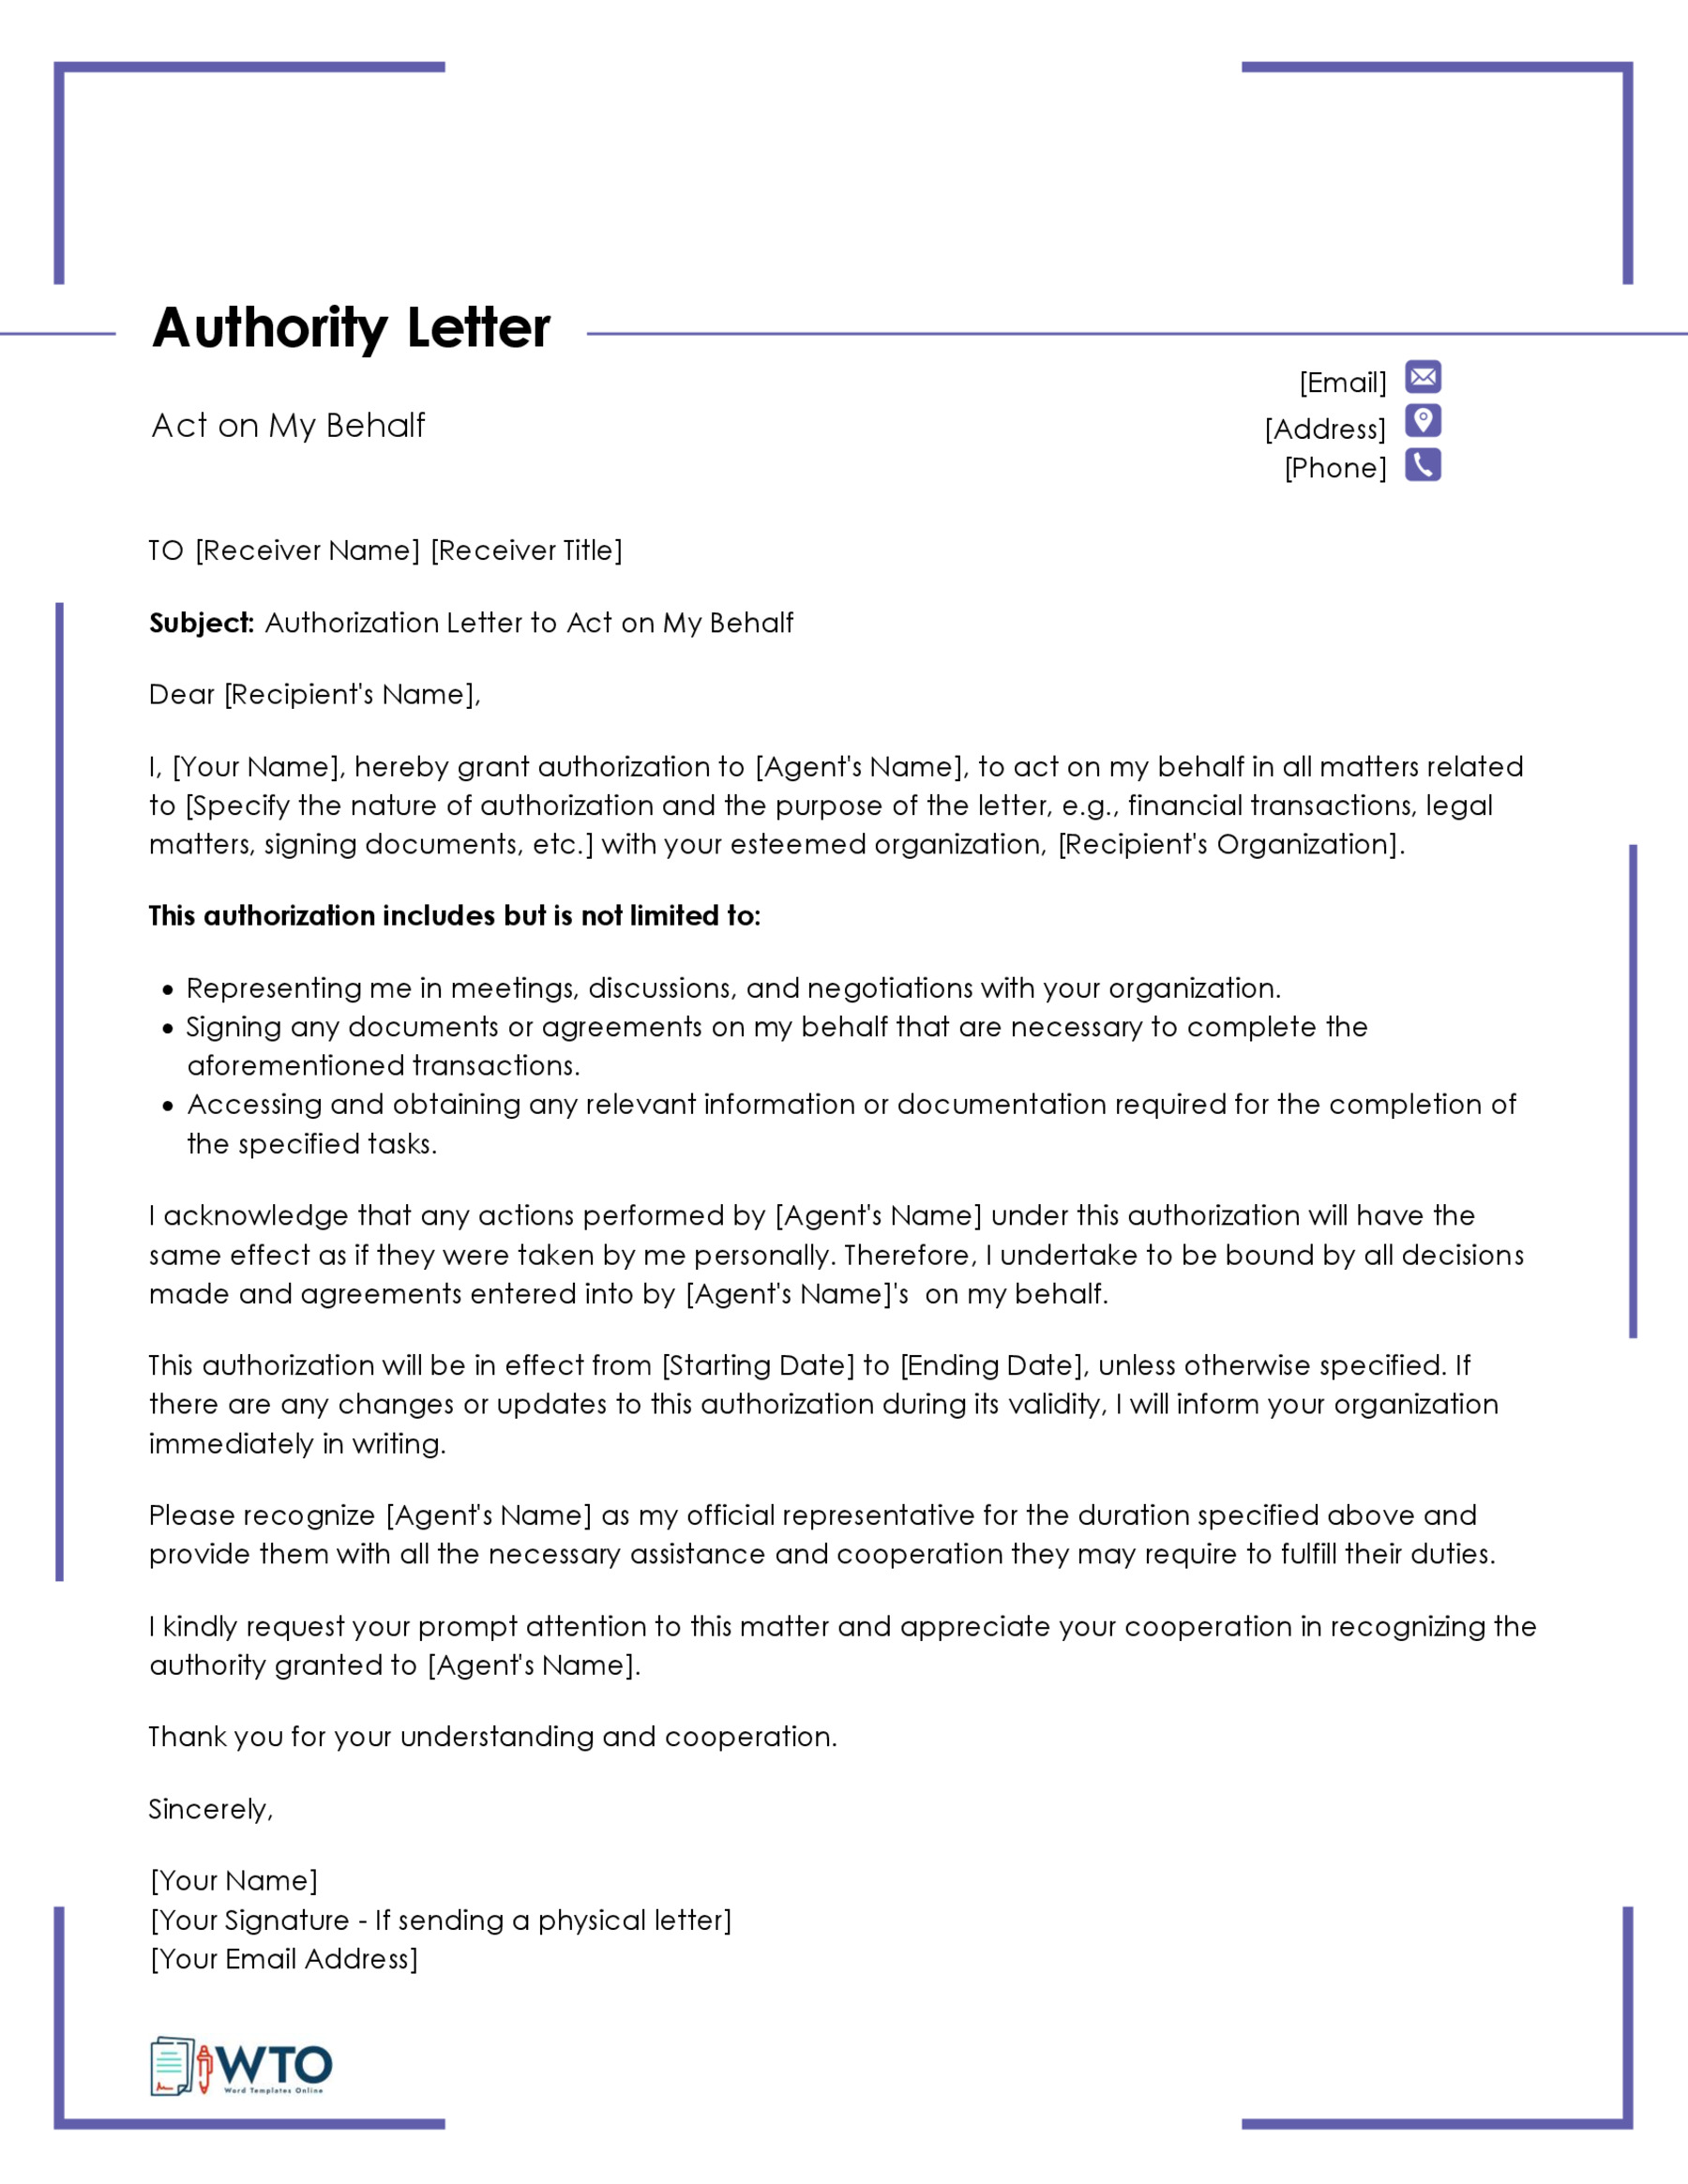 Free Editable Act on Behalf Authorization Letter Template 06 for Word Document